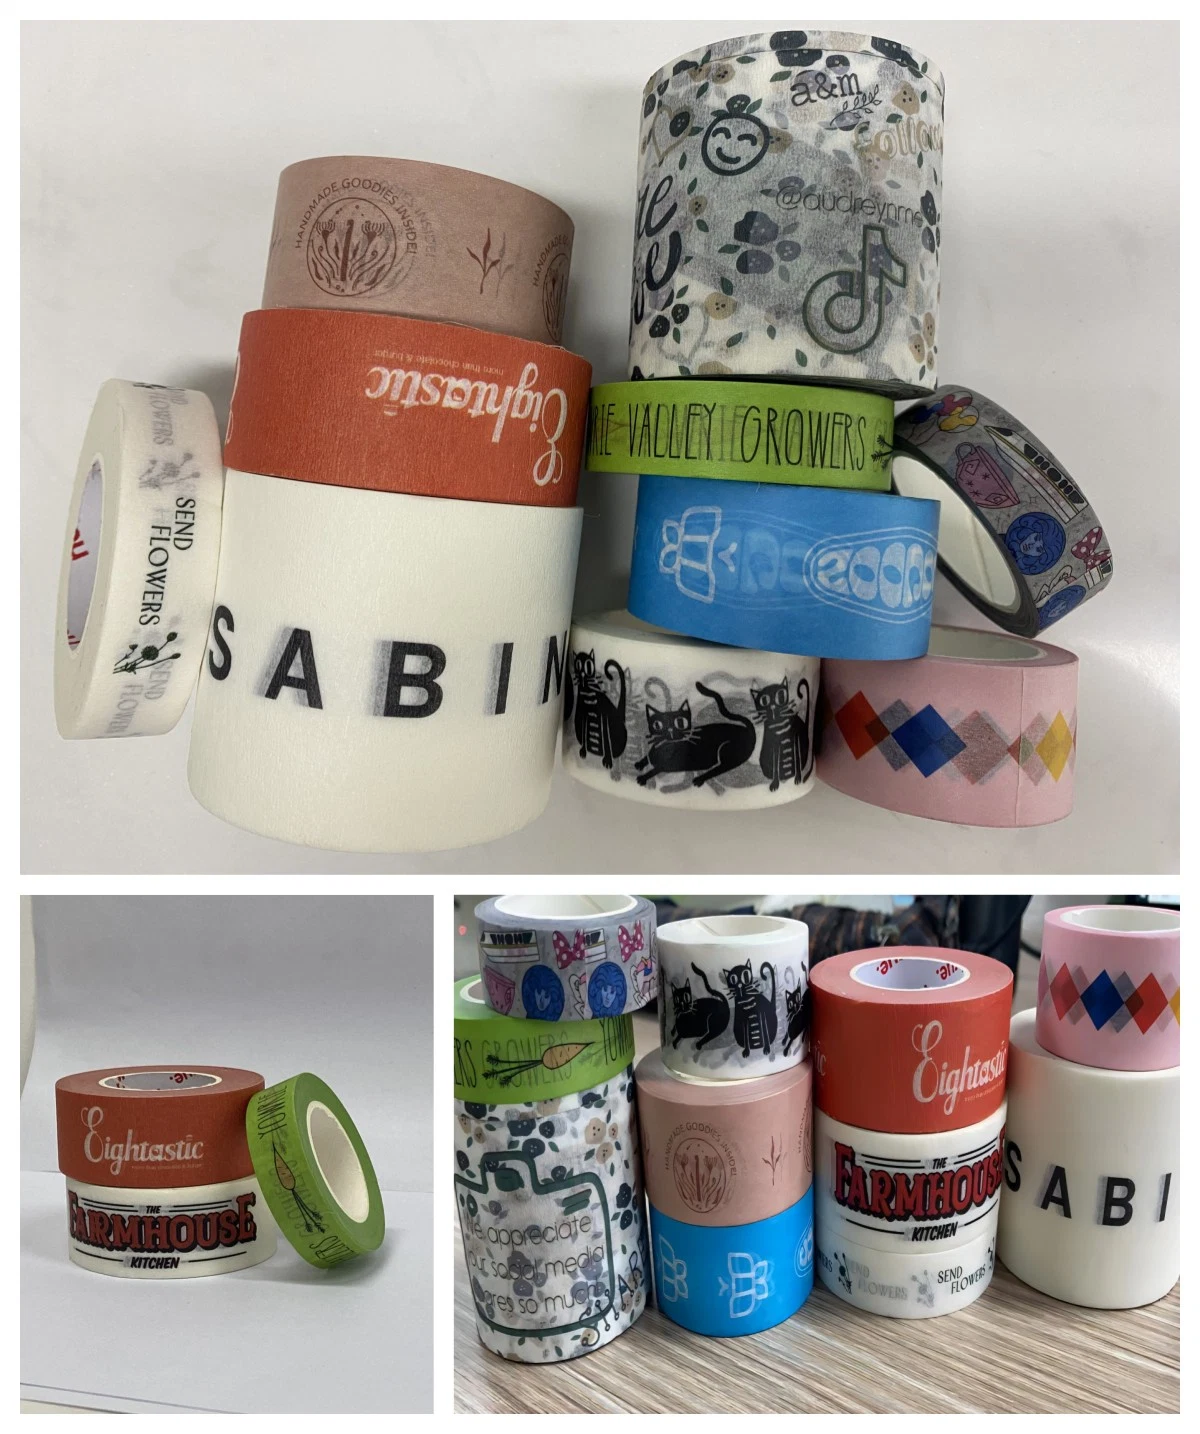 OEM Colorful Japanese Paper Masking Adhesive Washi Tape Sticker Stationery Use for Gift Wrapping and Decoration